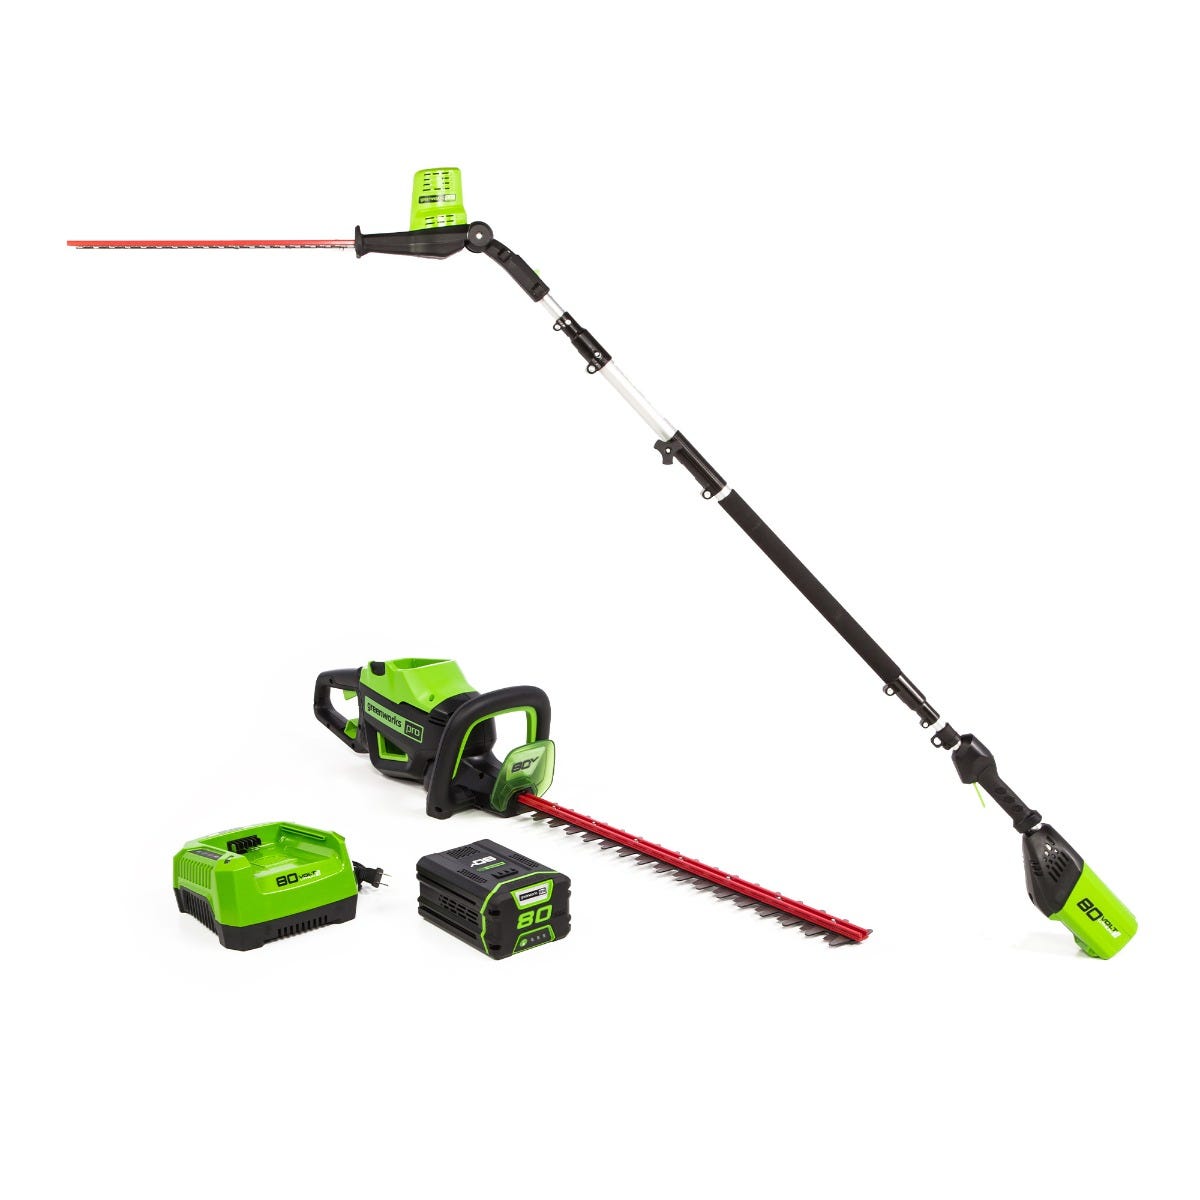 80V 24" Cordless Battery Hedge Trimmer & 20" Pole Hedge Trimmer Combo Kit w/ 2.0 Ah USB Battery & Charger